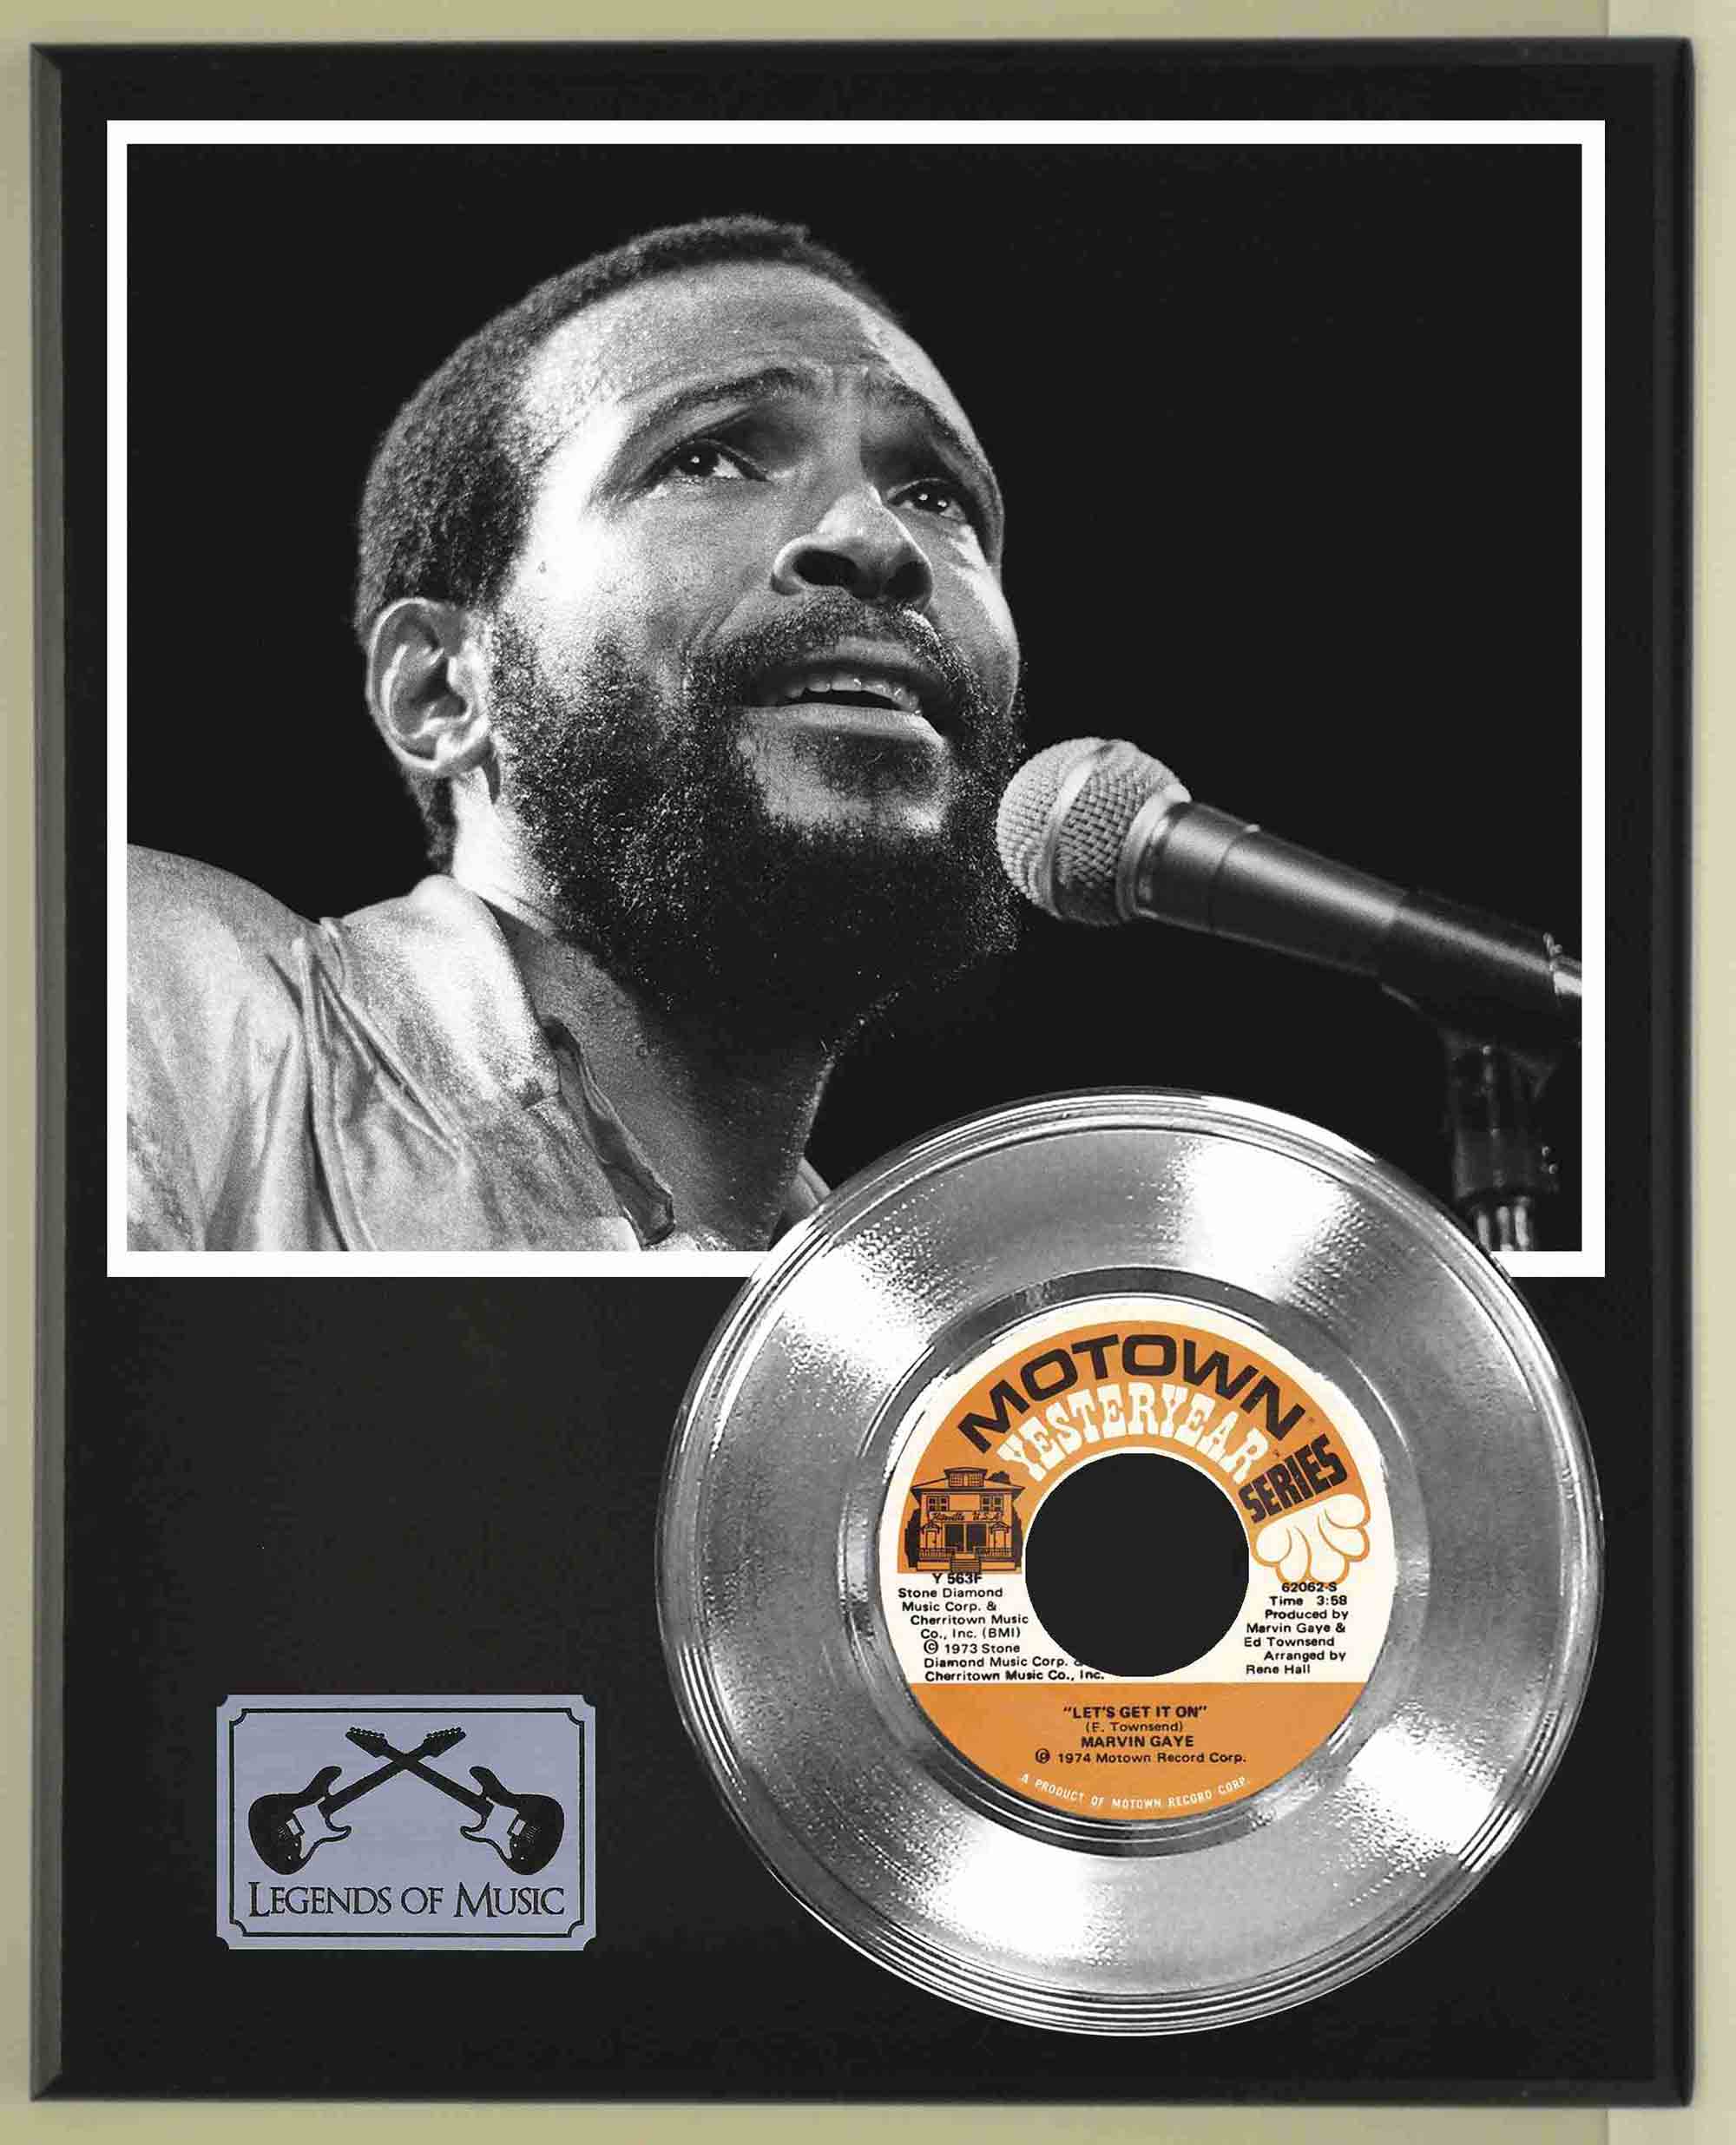 UMe Marks 45th Anniversary Of Marvin Gaye's What's Going On With  Seven-Album Vinyl Release, Volume 3: 1971-1981 On May 27